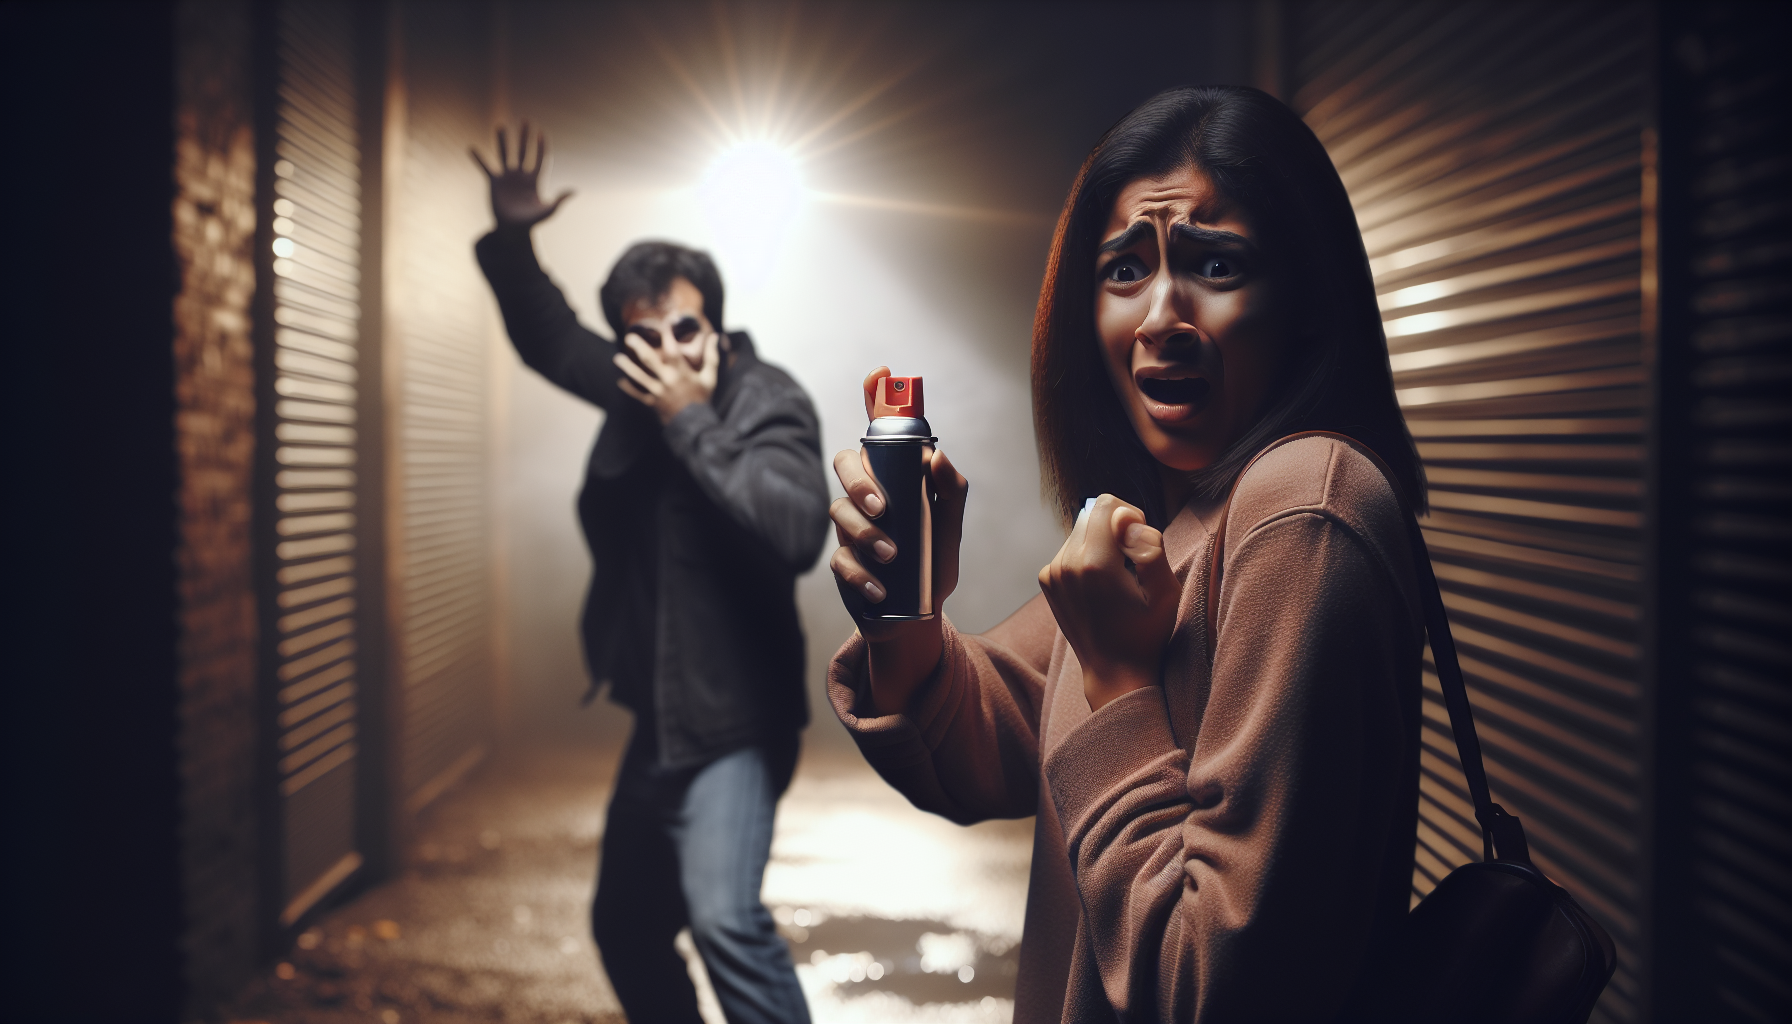 A person successfully using pepper spray in a self-defense situation